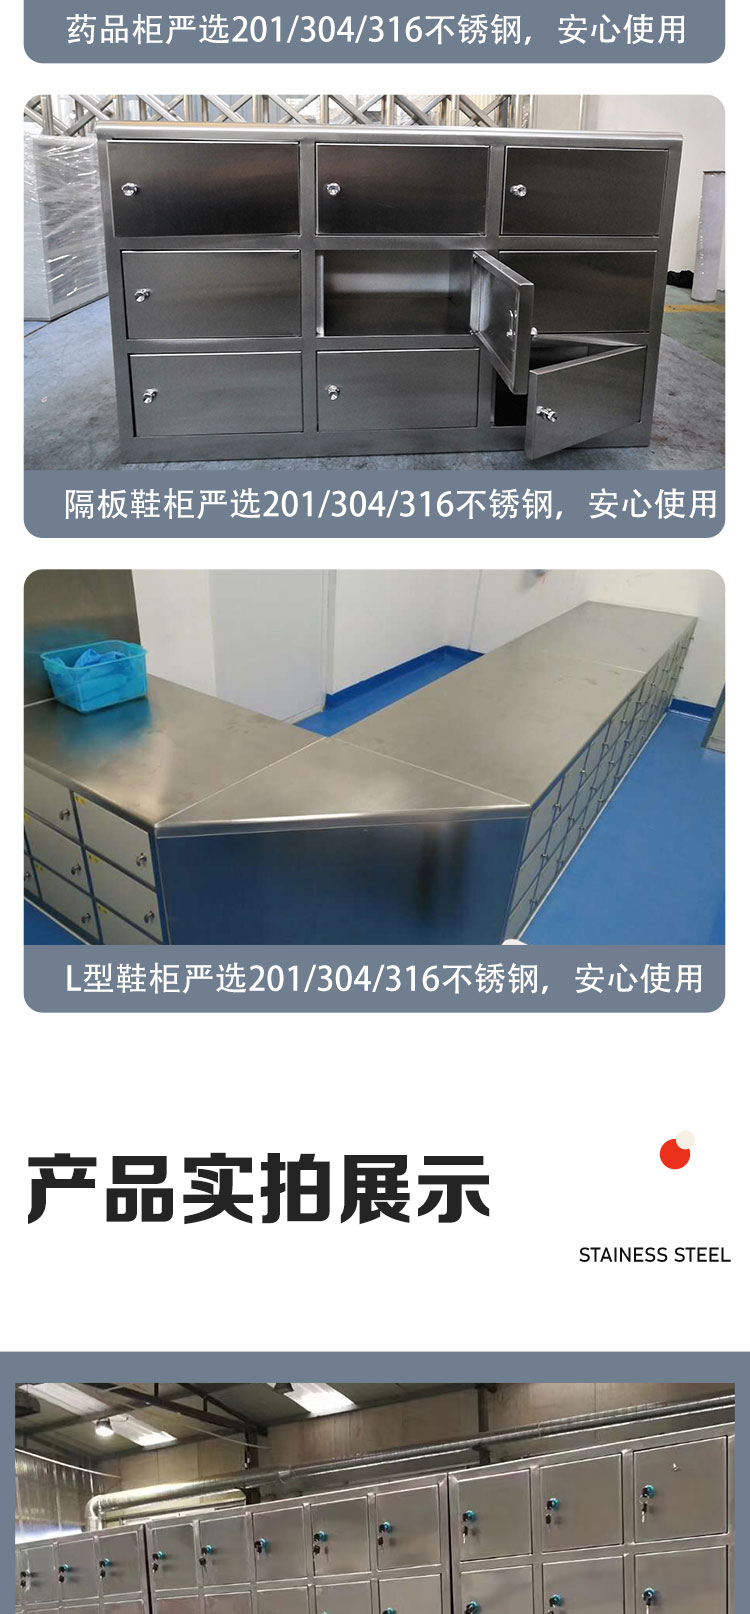 Special accounting intensive shelf for the financial office of Tamanlai Archives intensive cabinet Filing cabinet production enterprises support customization